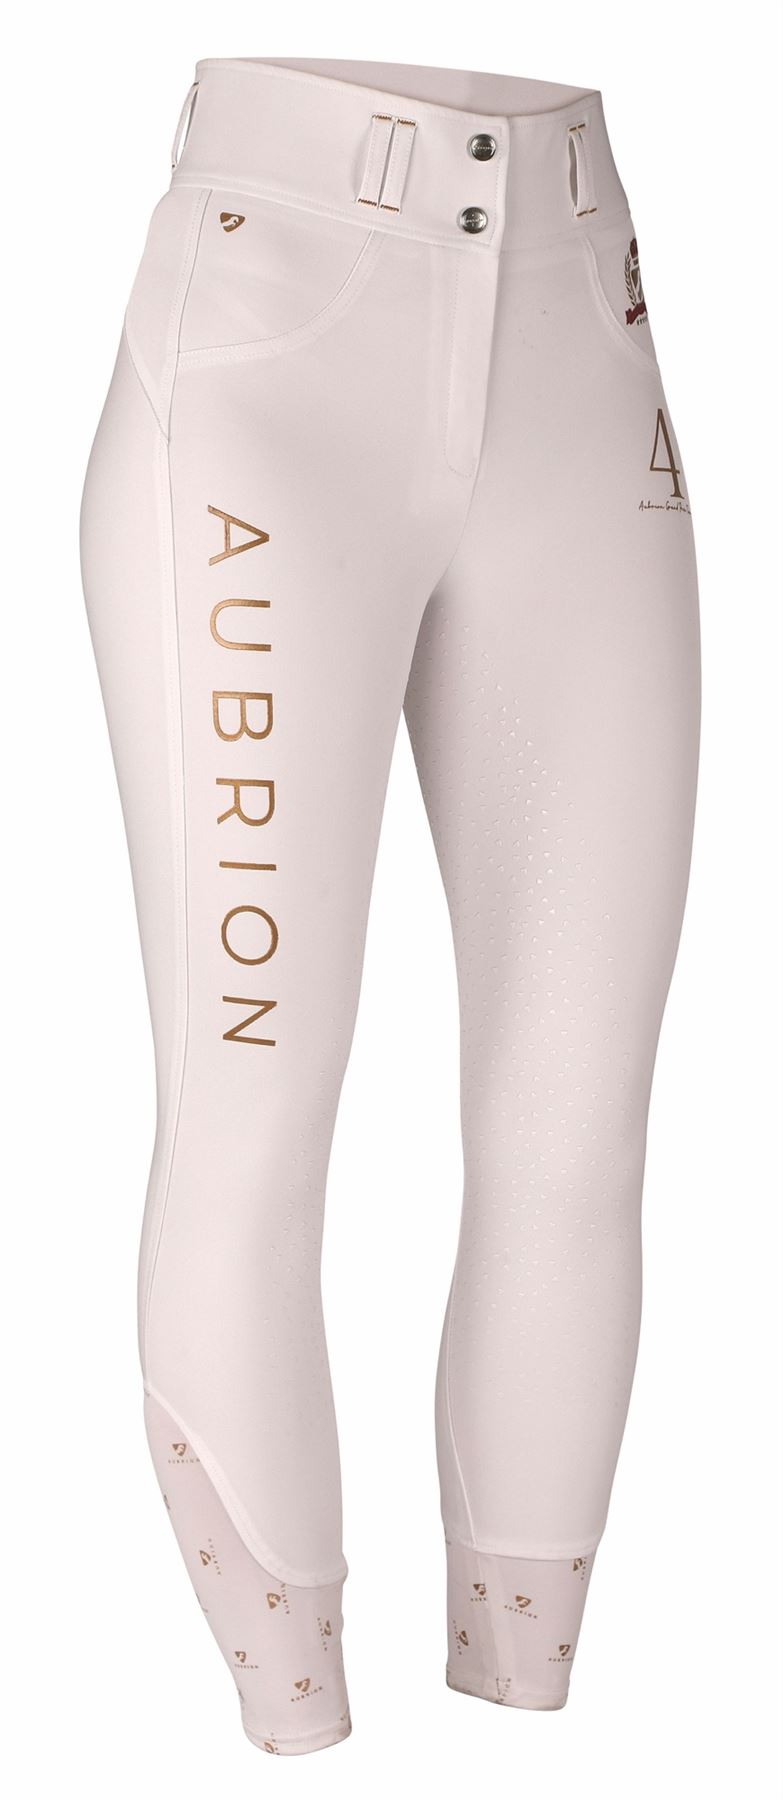 Shires Aubrion Team Breeches - Just Horse Riders